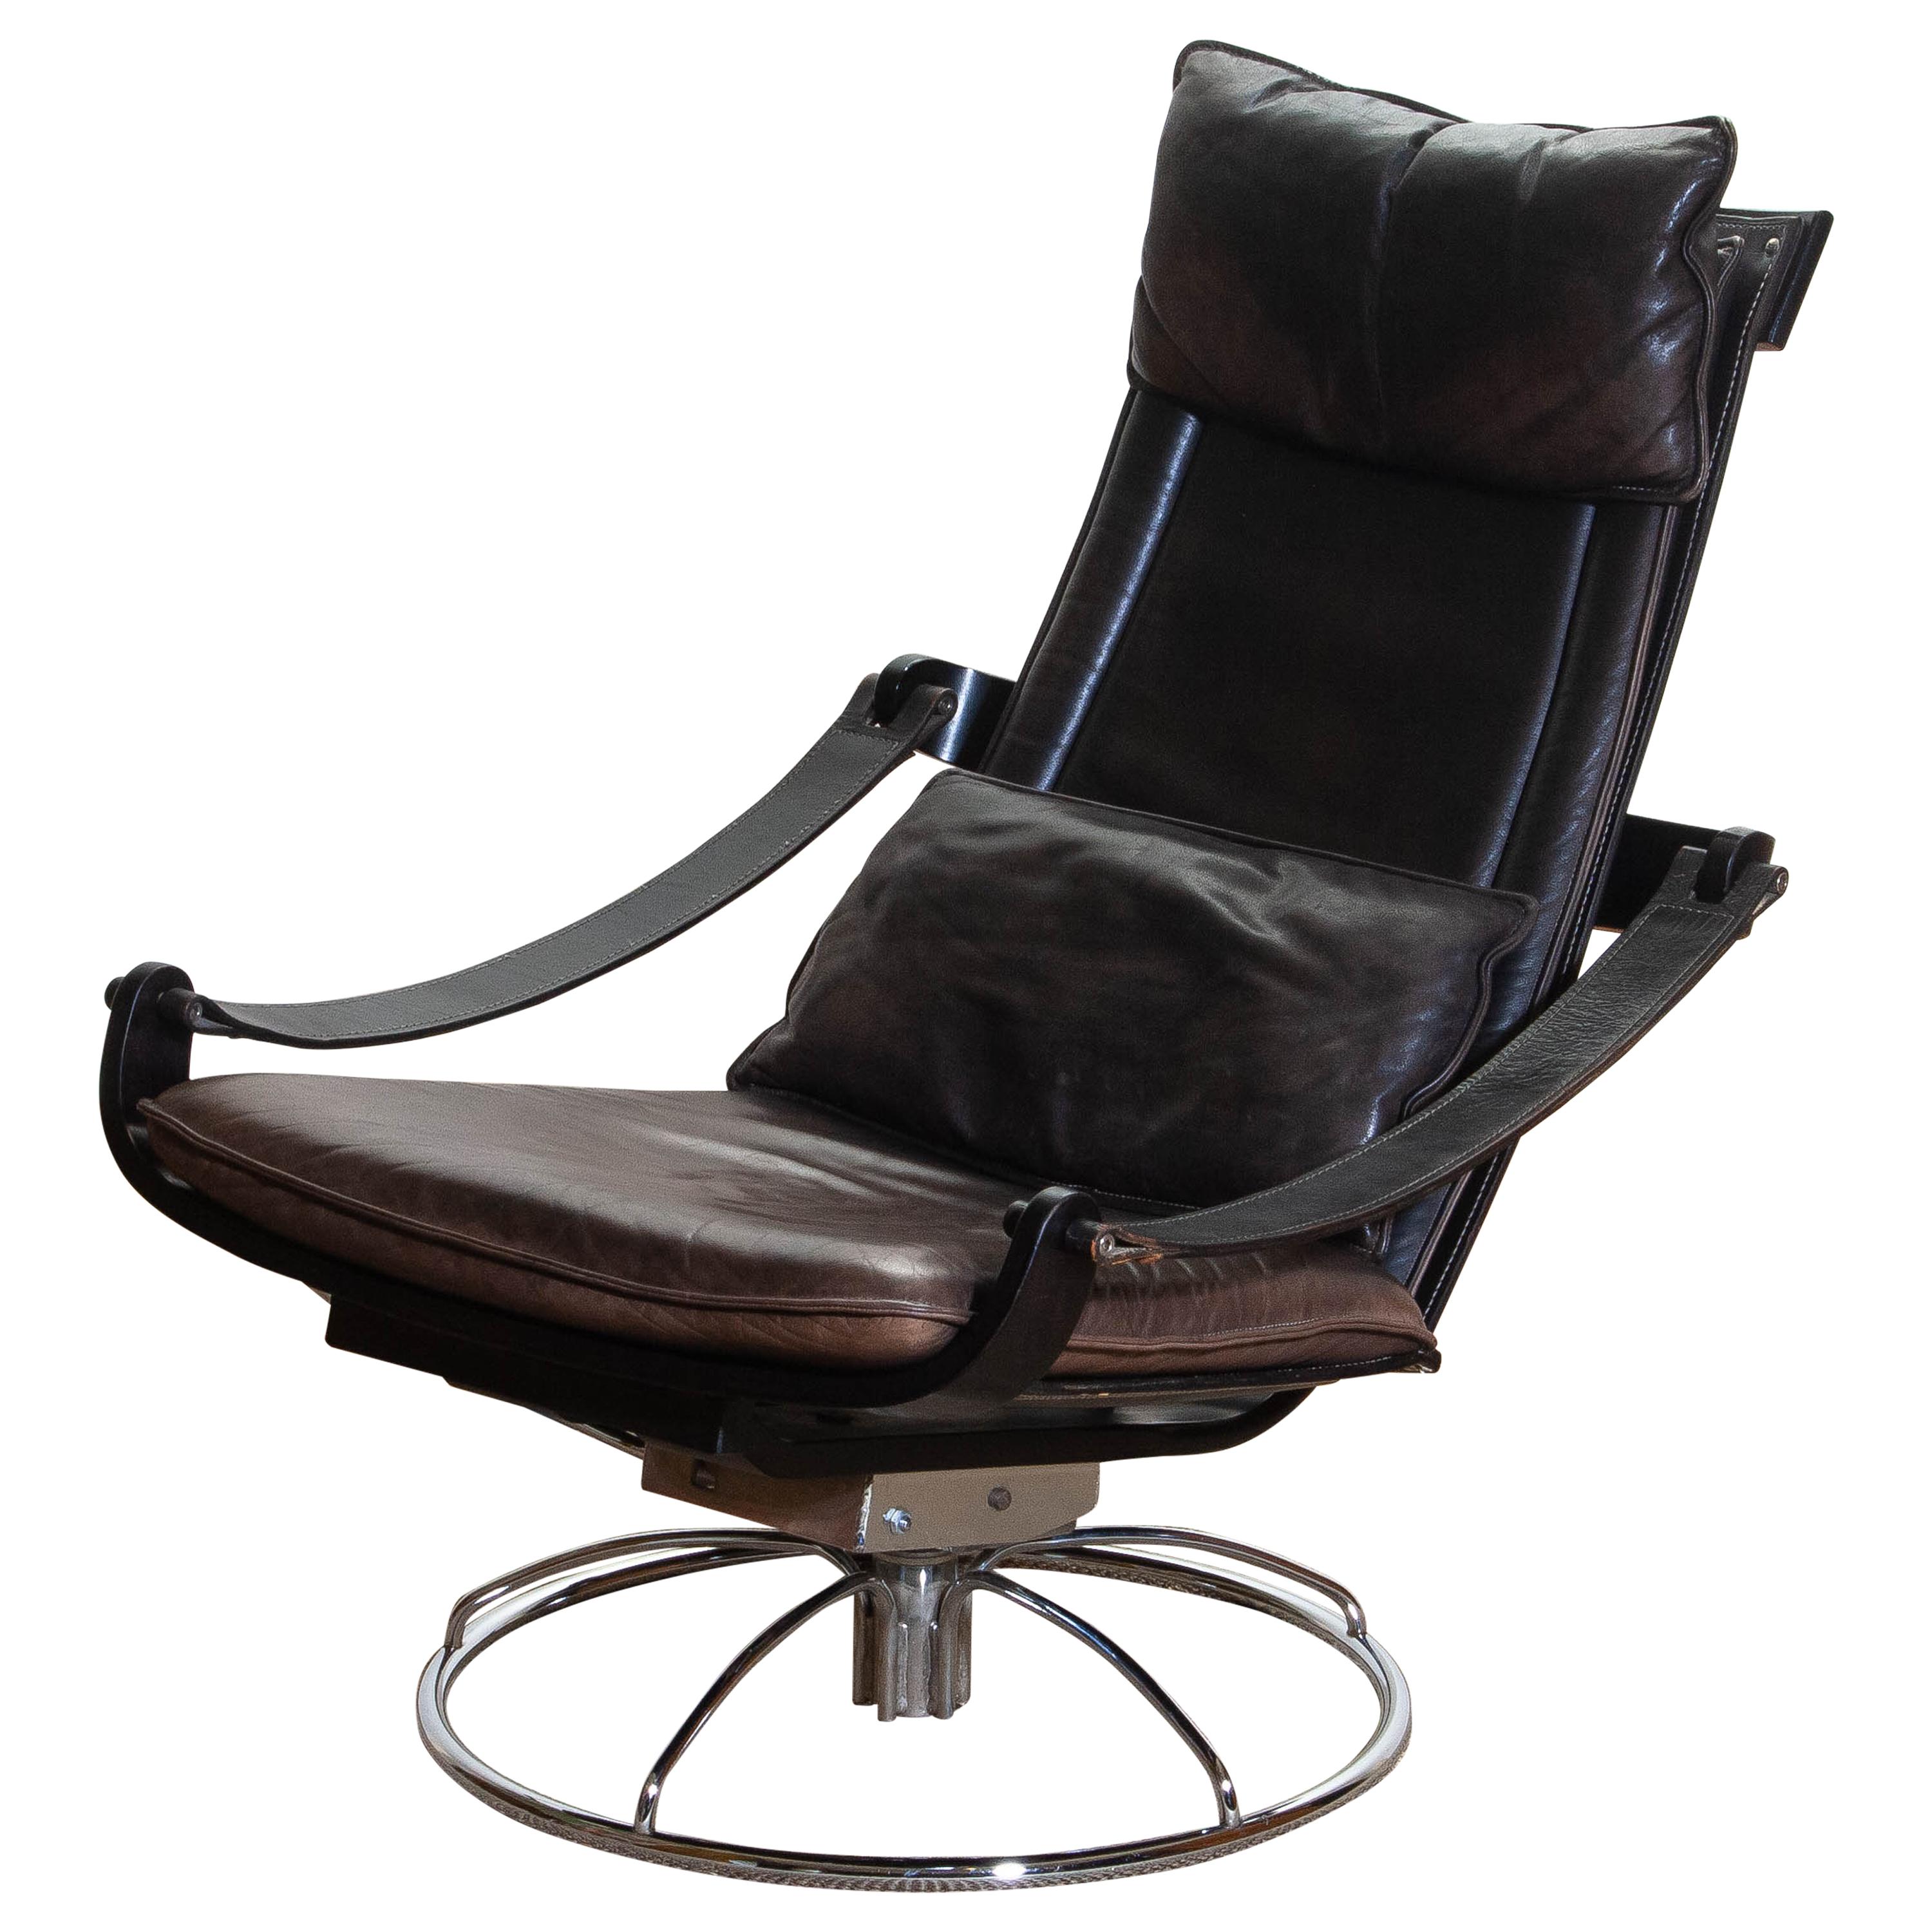 1970s Artistic Leather Swivel / Relax Chair by Ake Fribytter for Nelo, Sweden